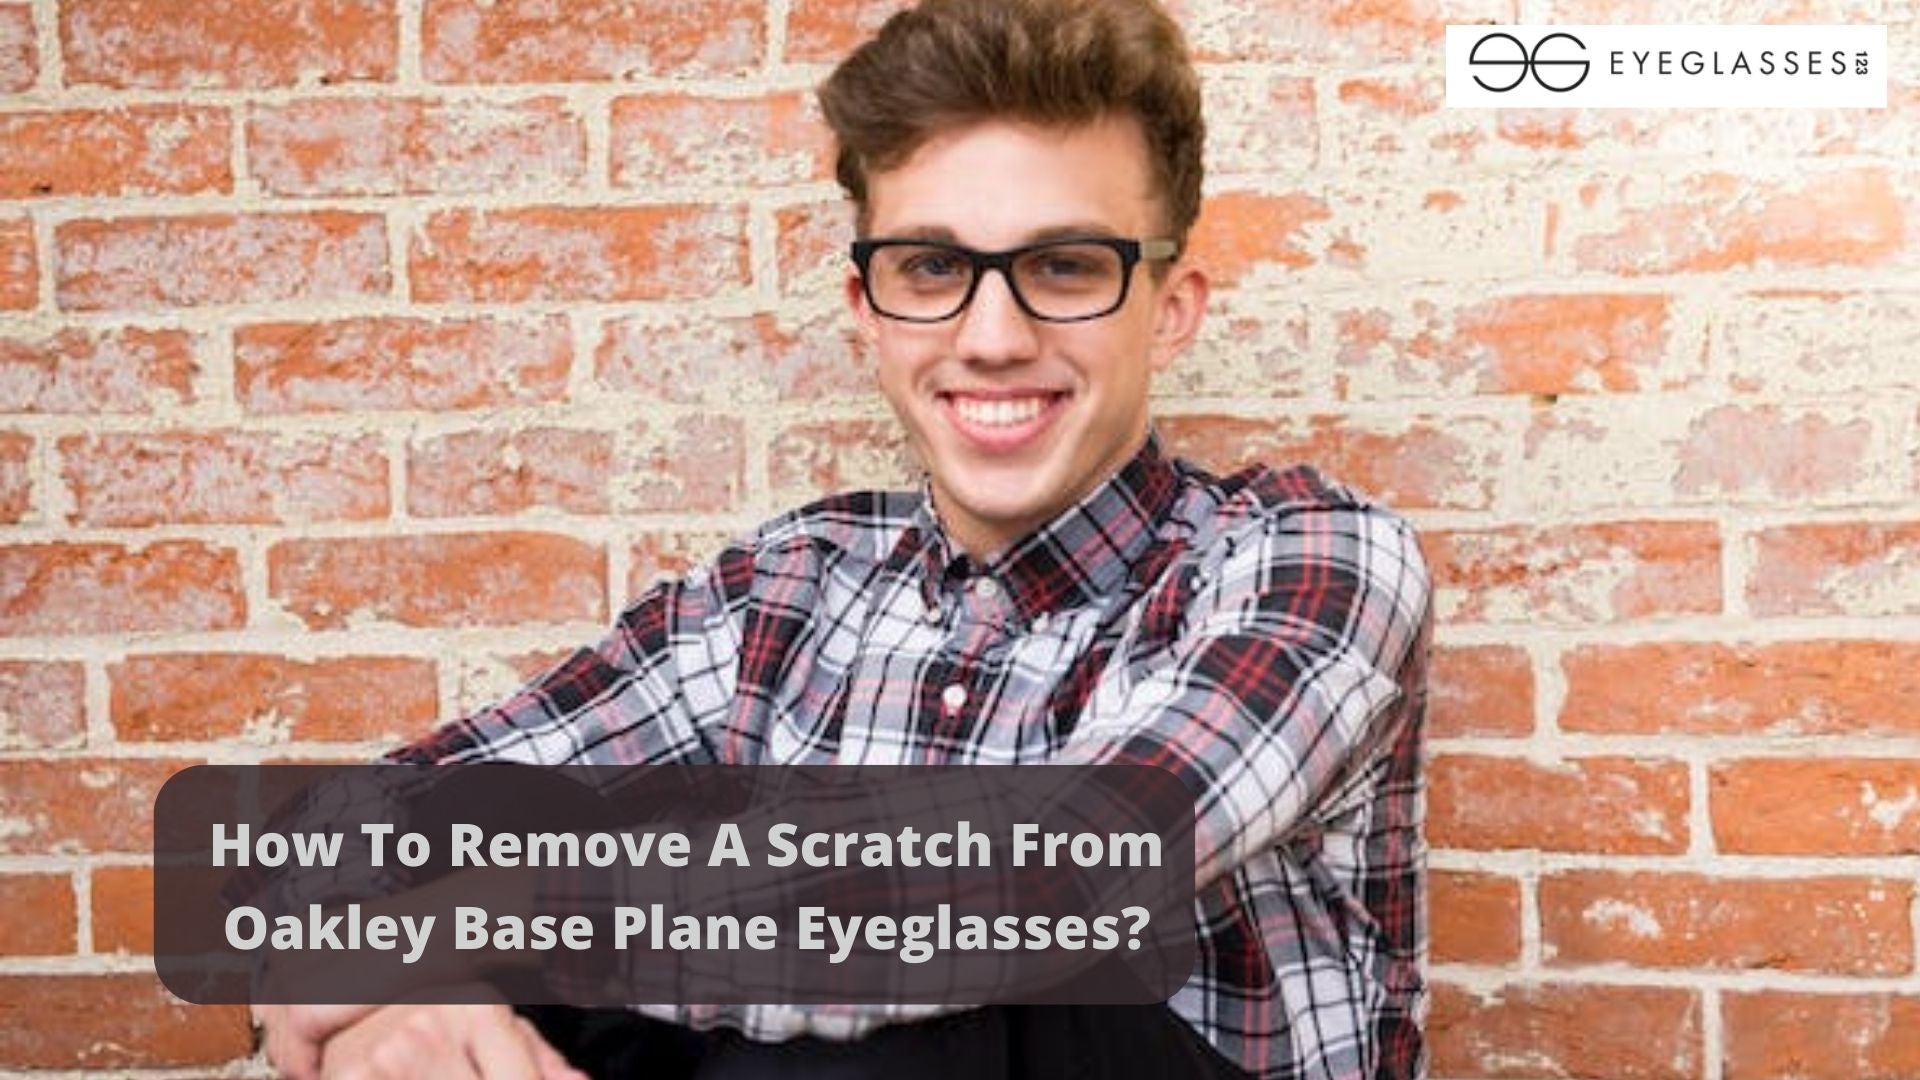 How To Remove A Scratch From Oakley Base Plane Eyeglasses?